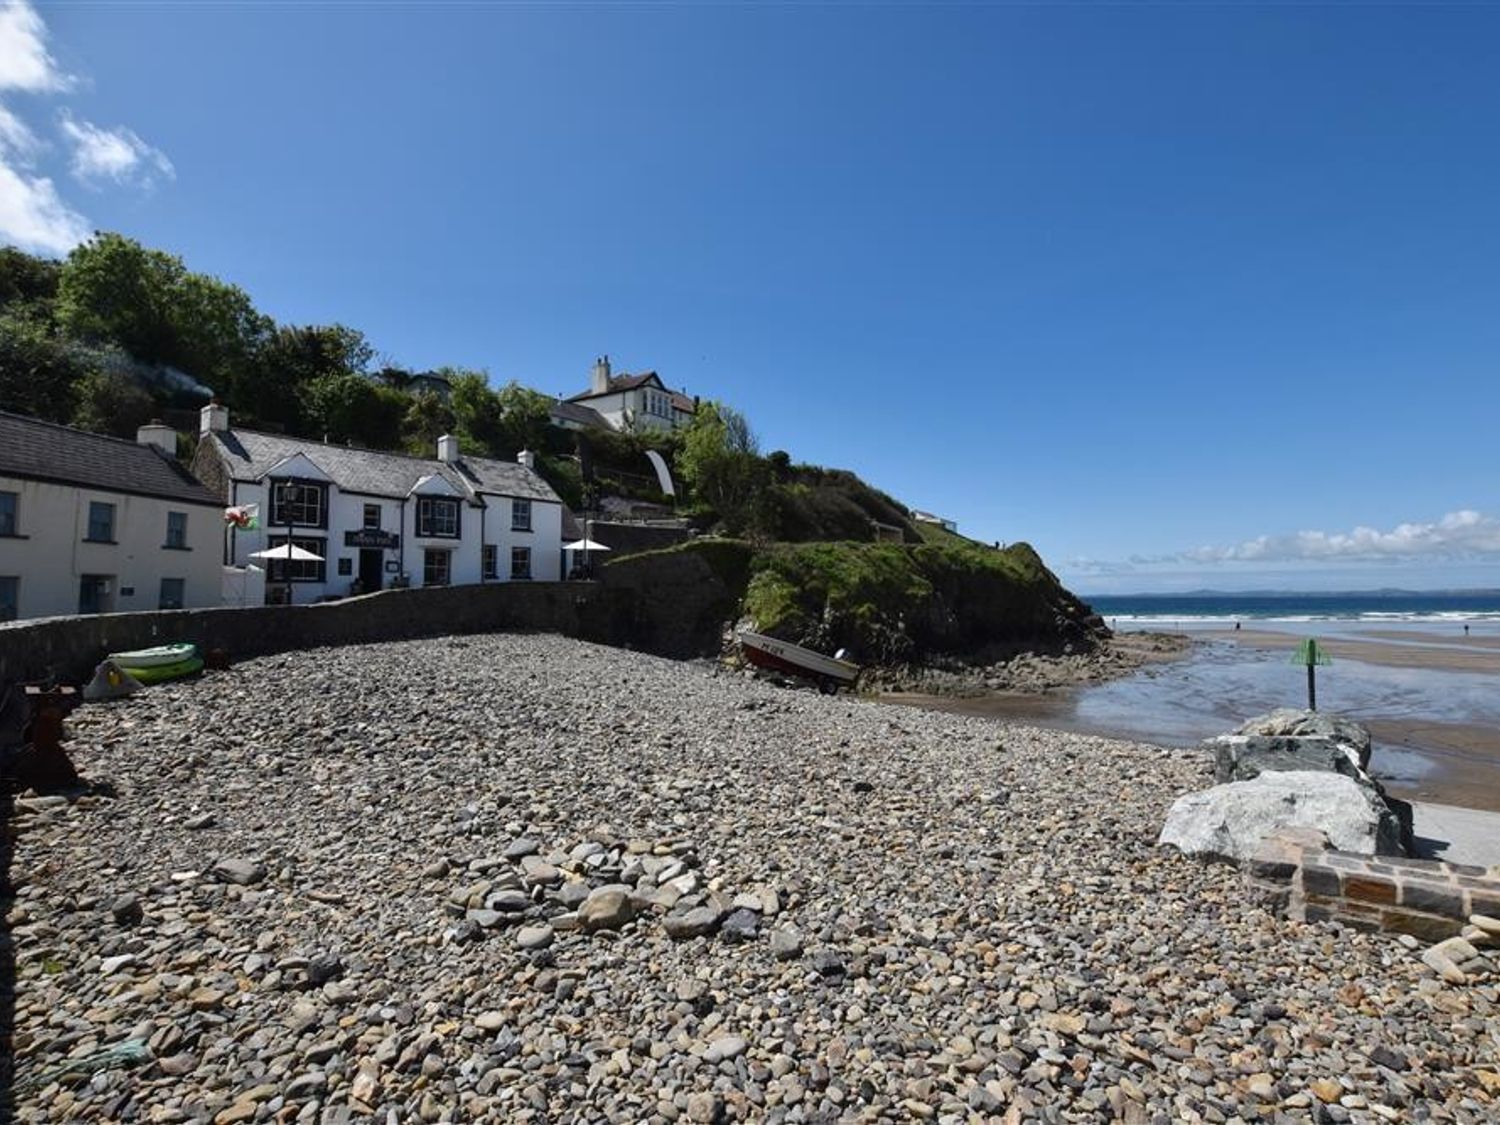 Beach Cottage - South Wales - 1036169 - photo 1